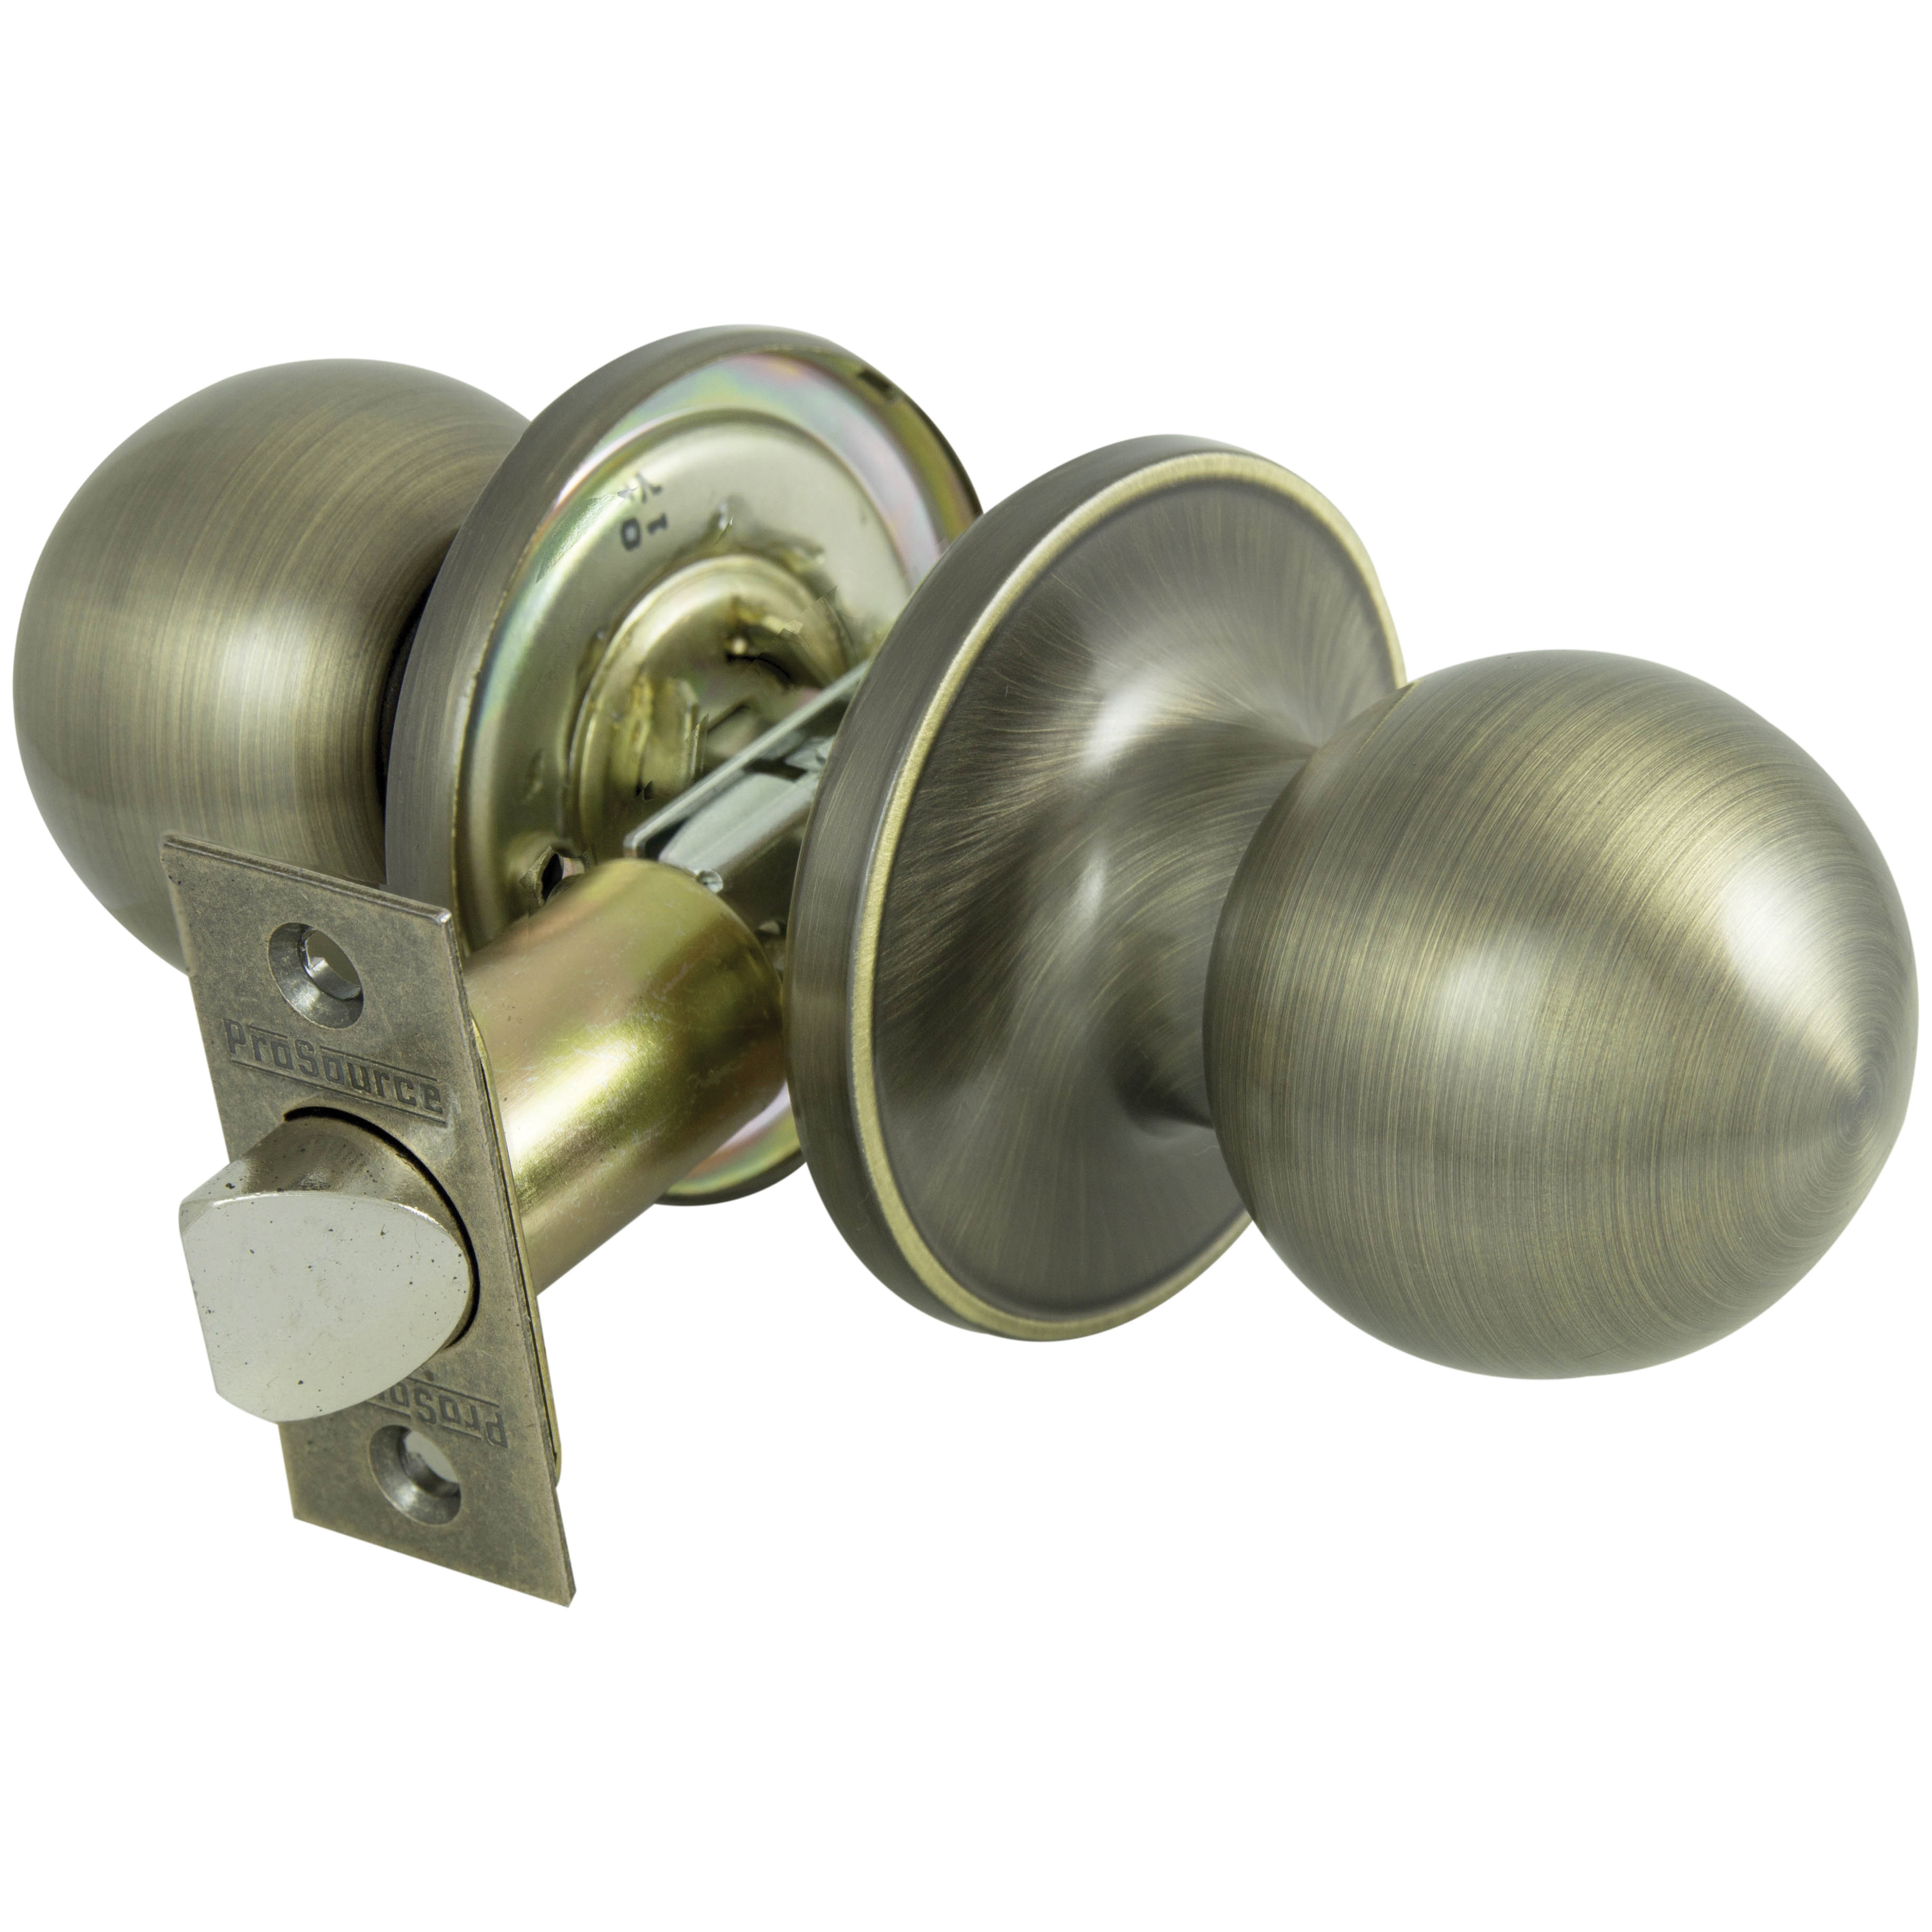 T3830V-PS Passage Knob, Metal, Antique Brass, 2-3/8 to 2-3/4 in Backset, 1-3/8 to 1-3/4 in Thick Door